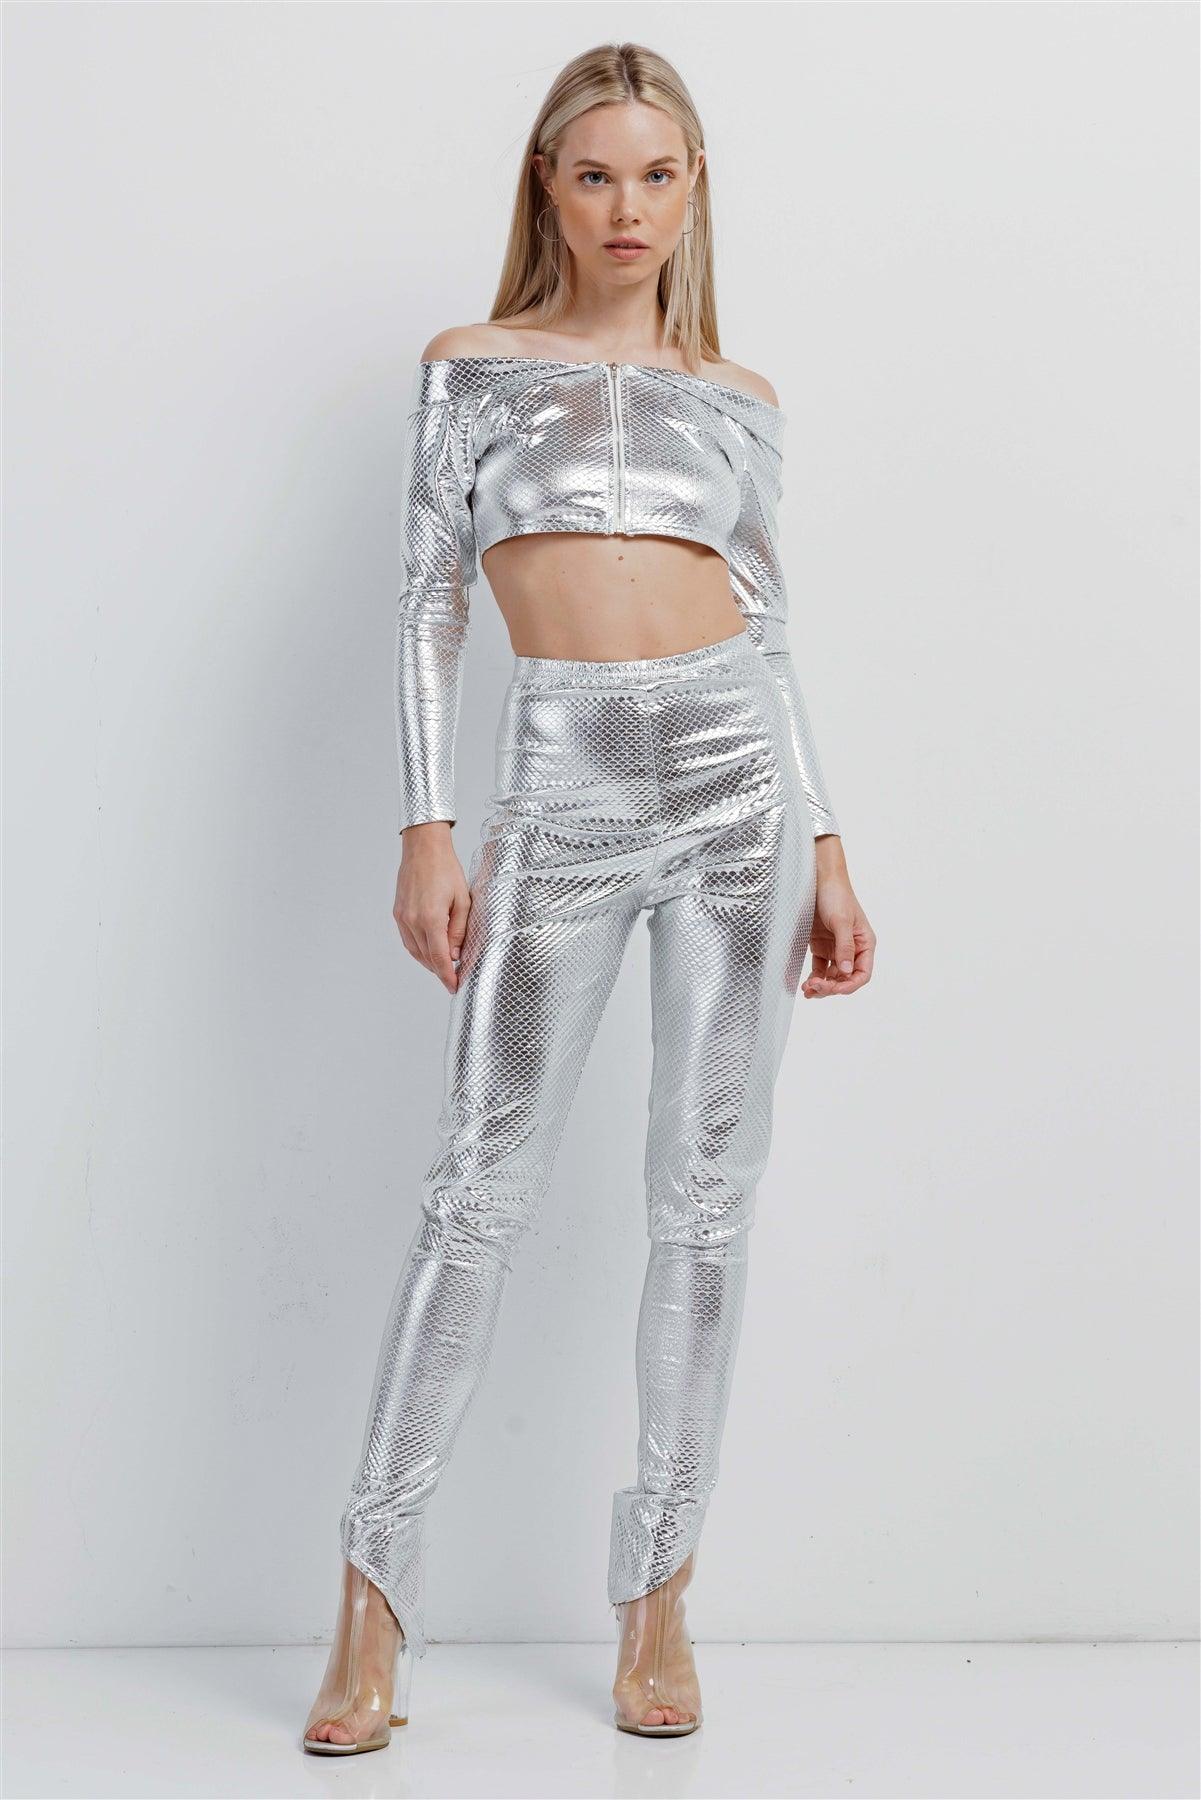 Metallic Silver Small Scales Print Long Sleeve Off-The-Shoulder Cropped Top And High Waist Slim Fit Legging Set /3-2-1